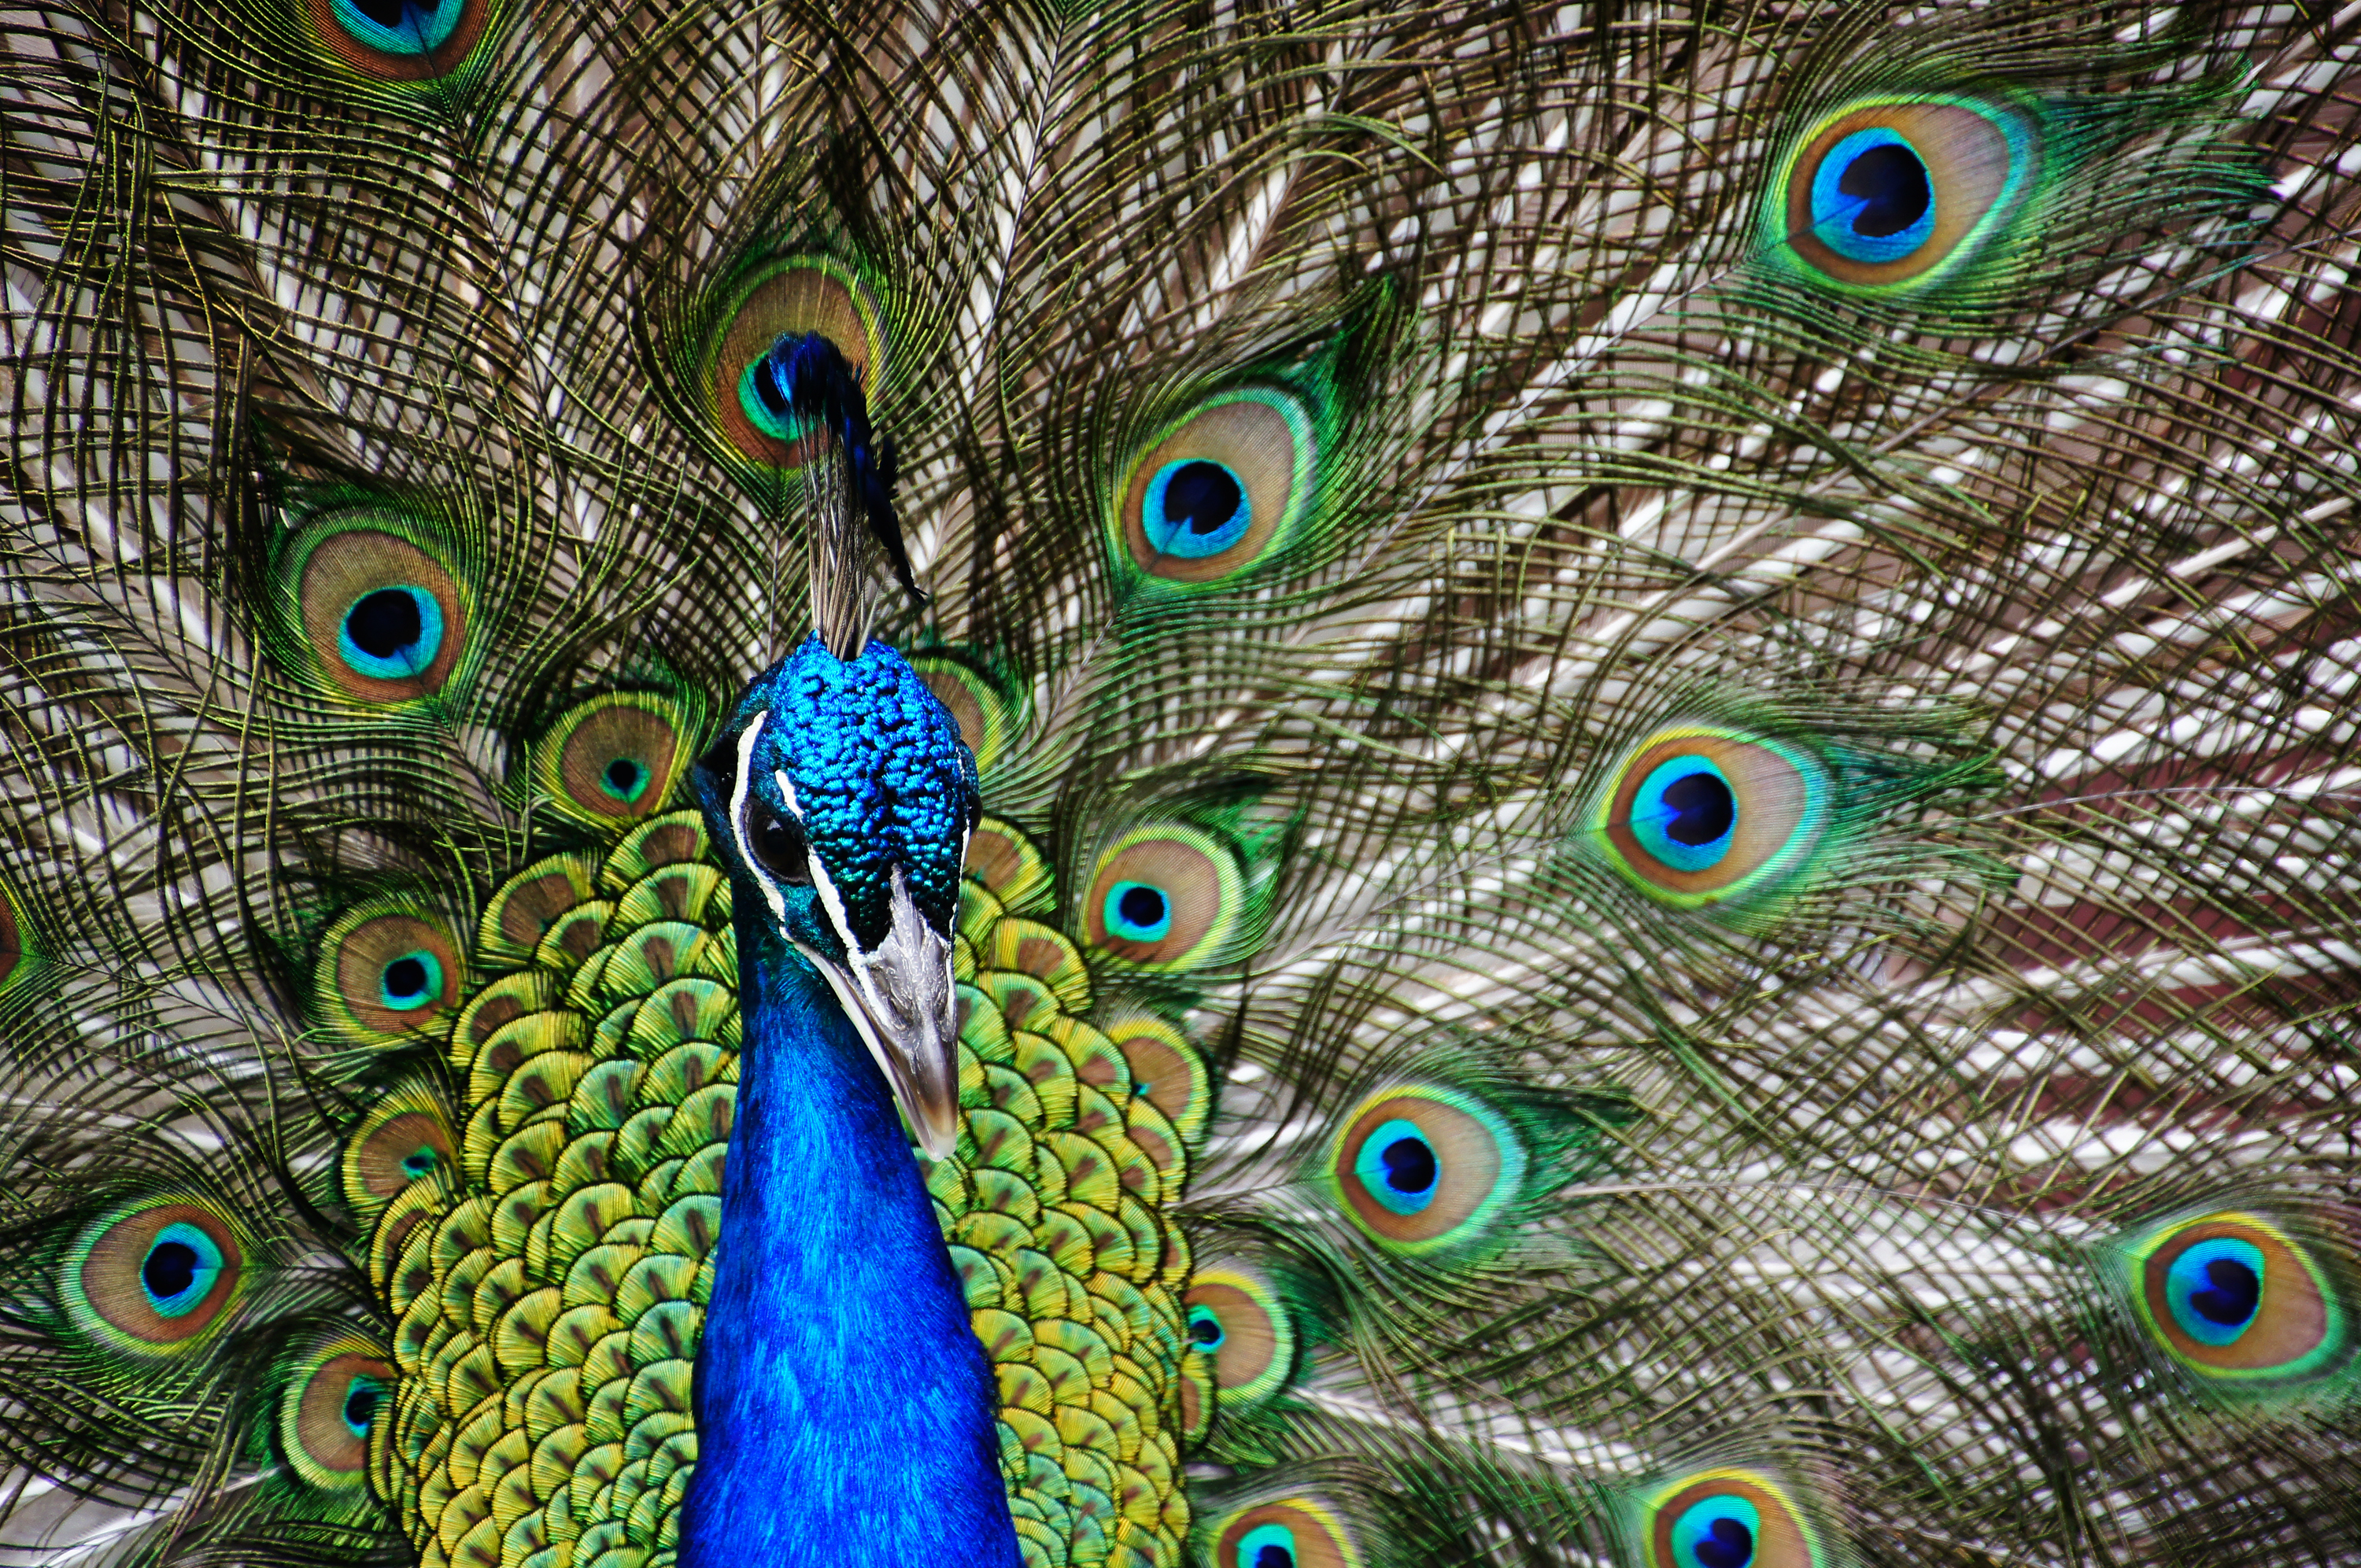 File:Ghi, pettingzoo (escaped peacock - not school pecock!)3.jpg -  Wikimedia Commons